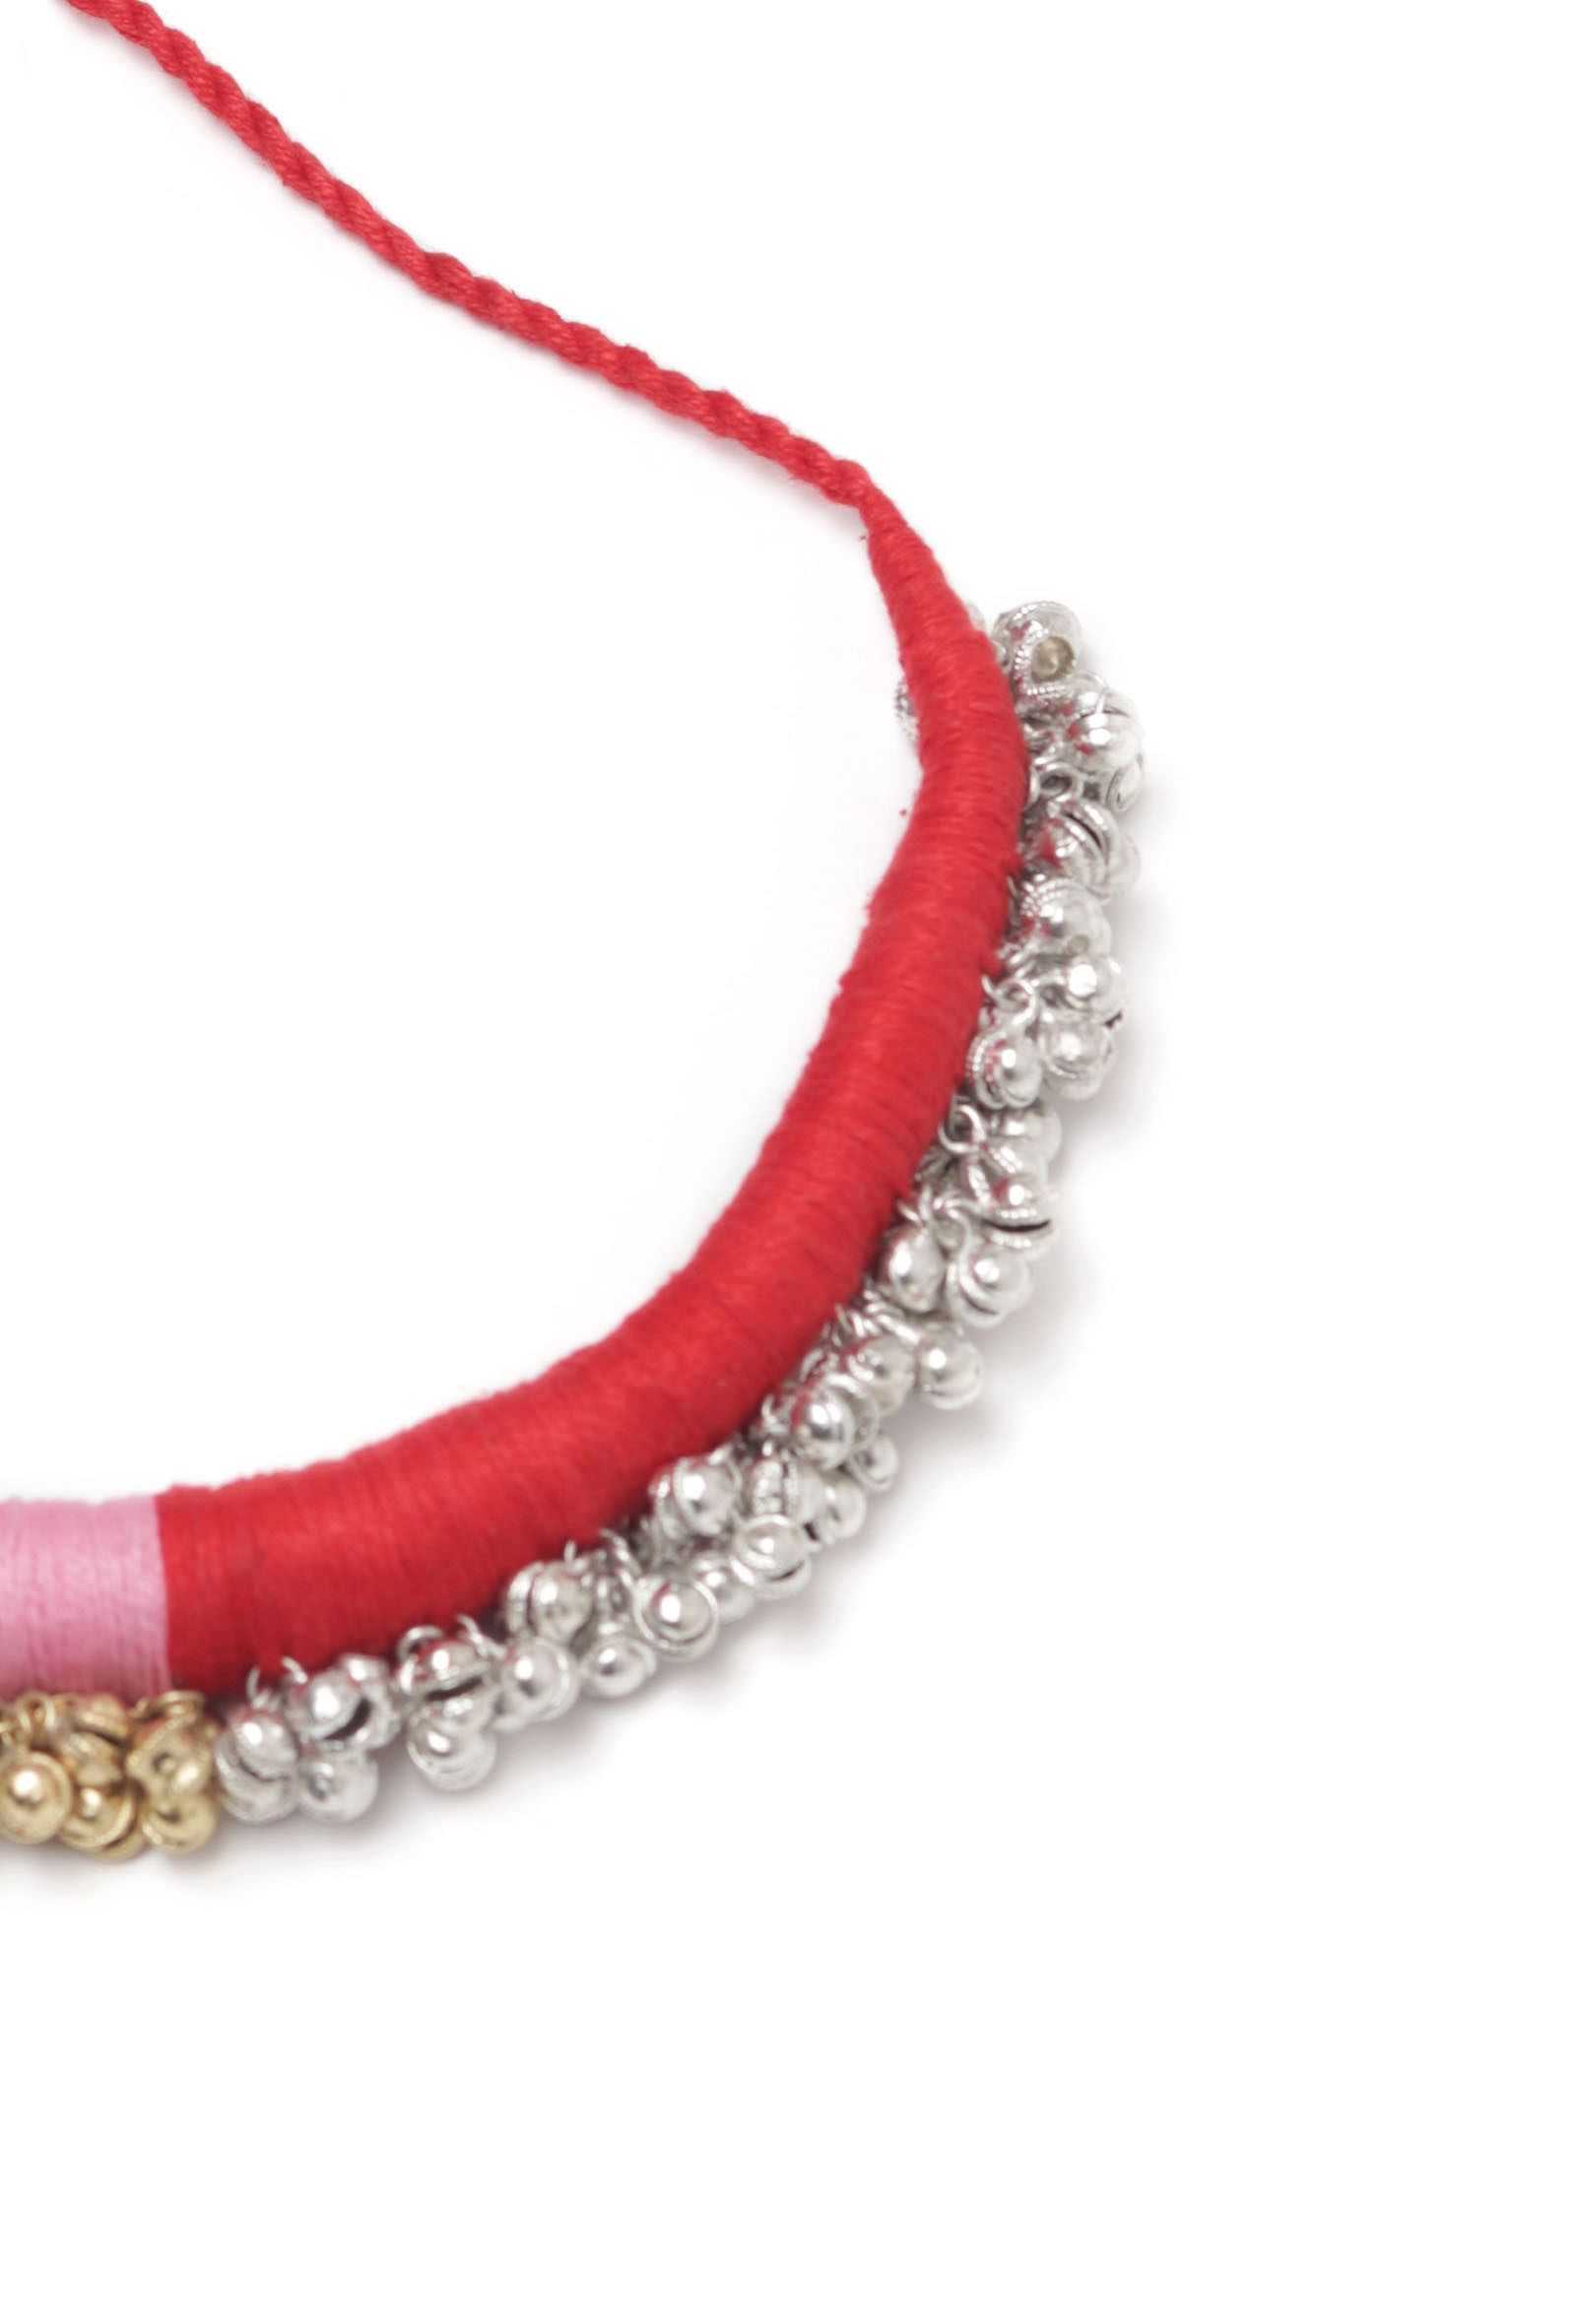 Lishika Duo Red and Pink Tribal Ghungroo Necklace